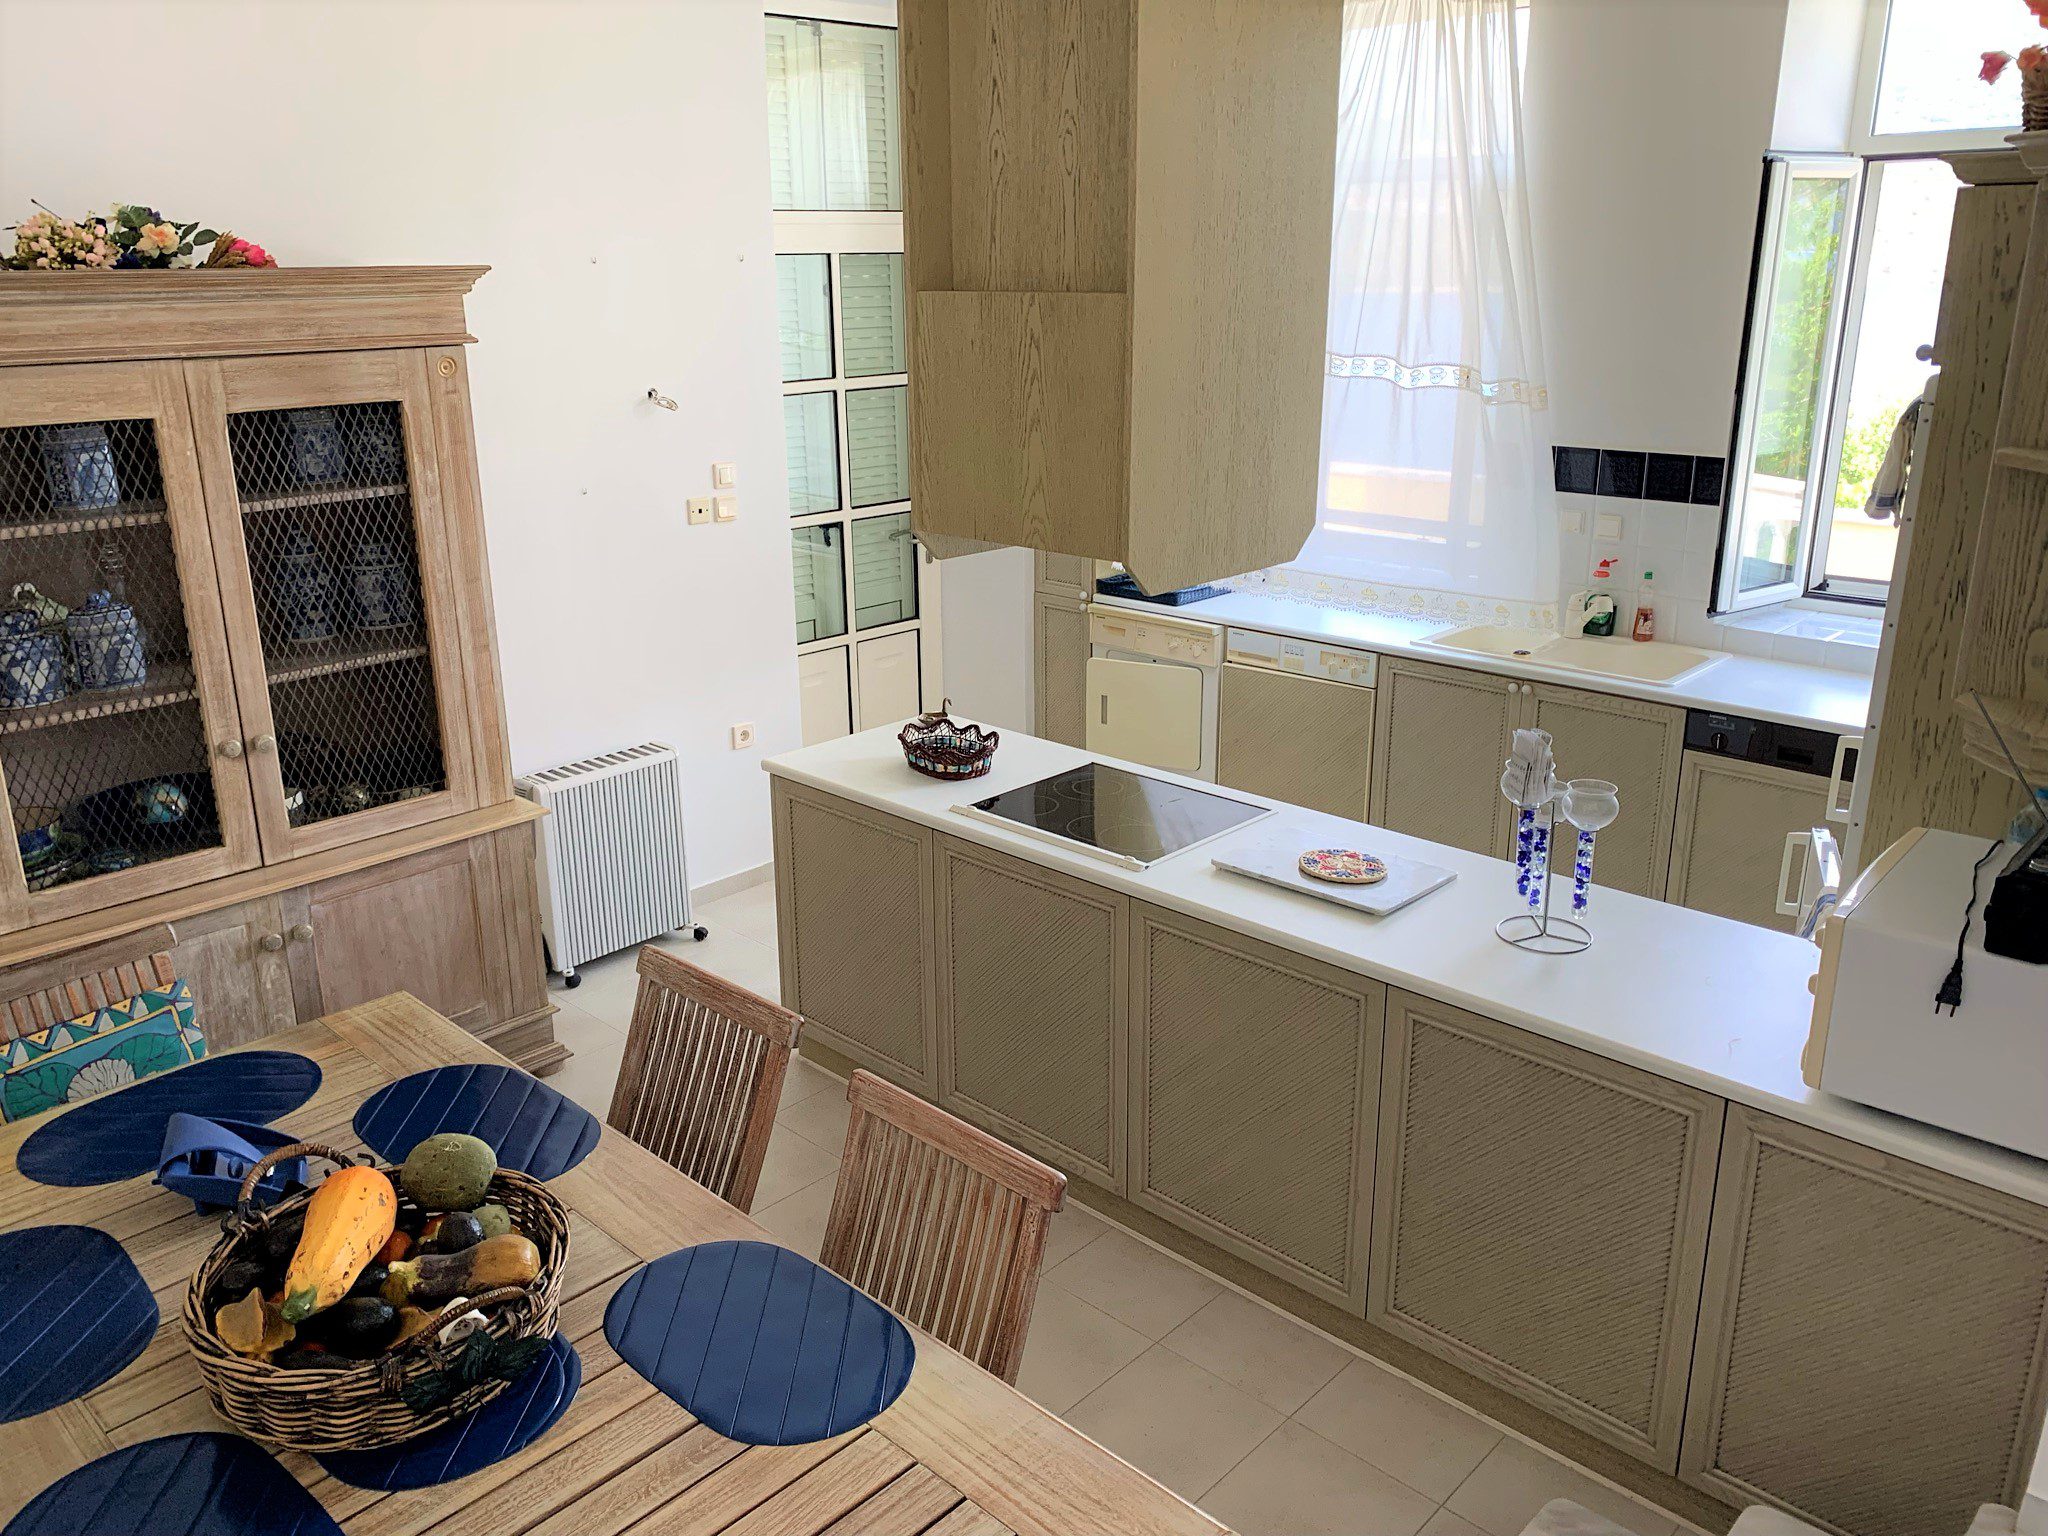 Kitchen of house for sale Ithaca Greece, Aetos